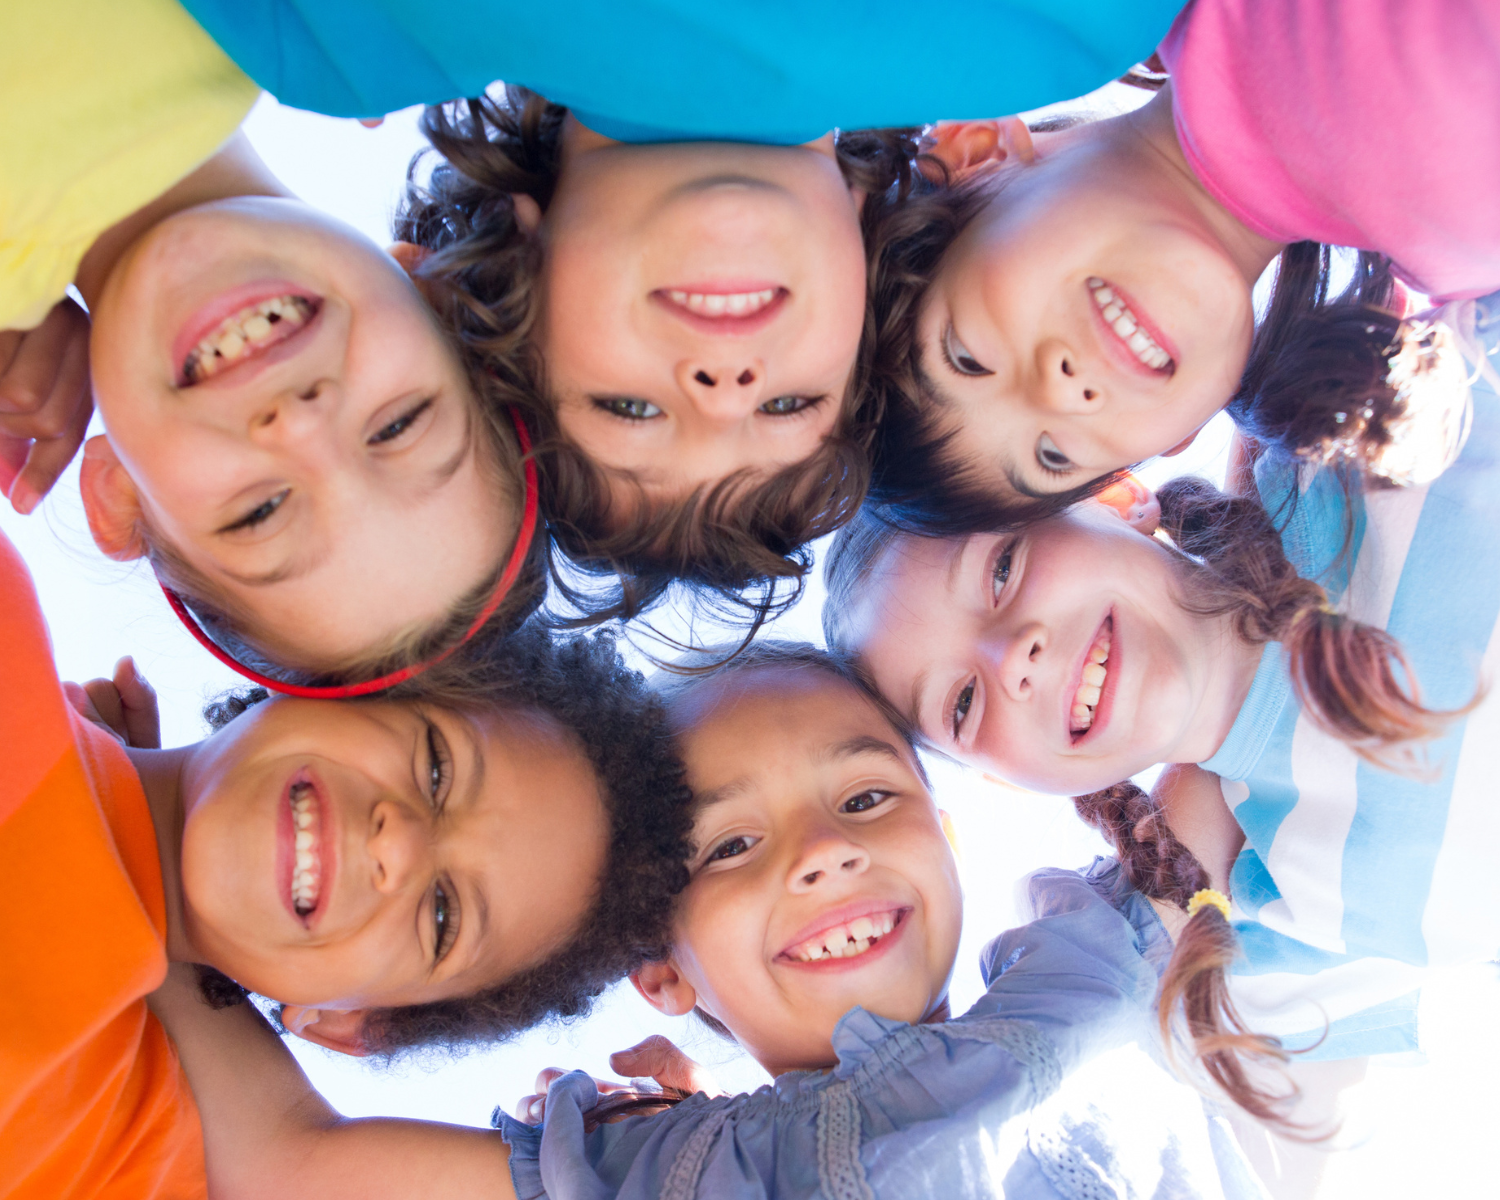 A huddle of children smiling in a circle